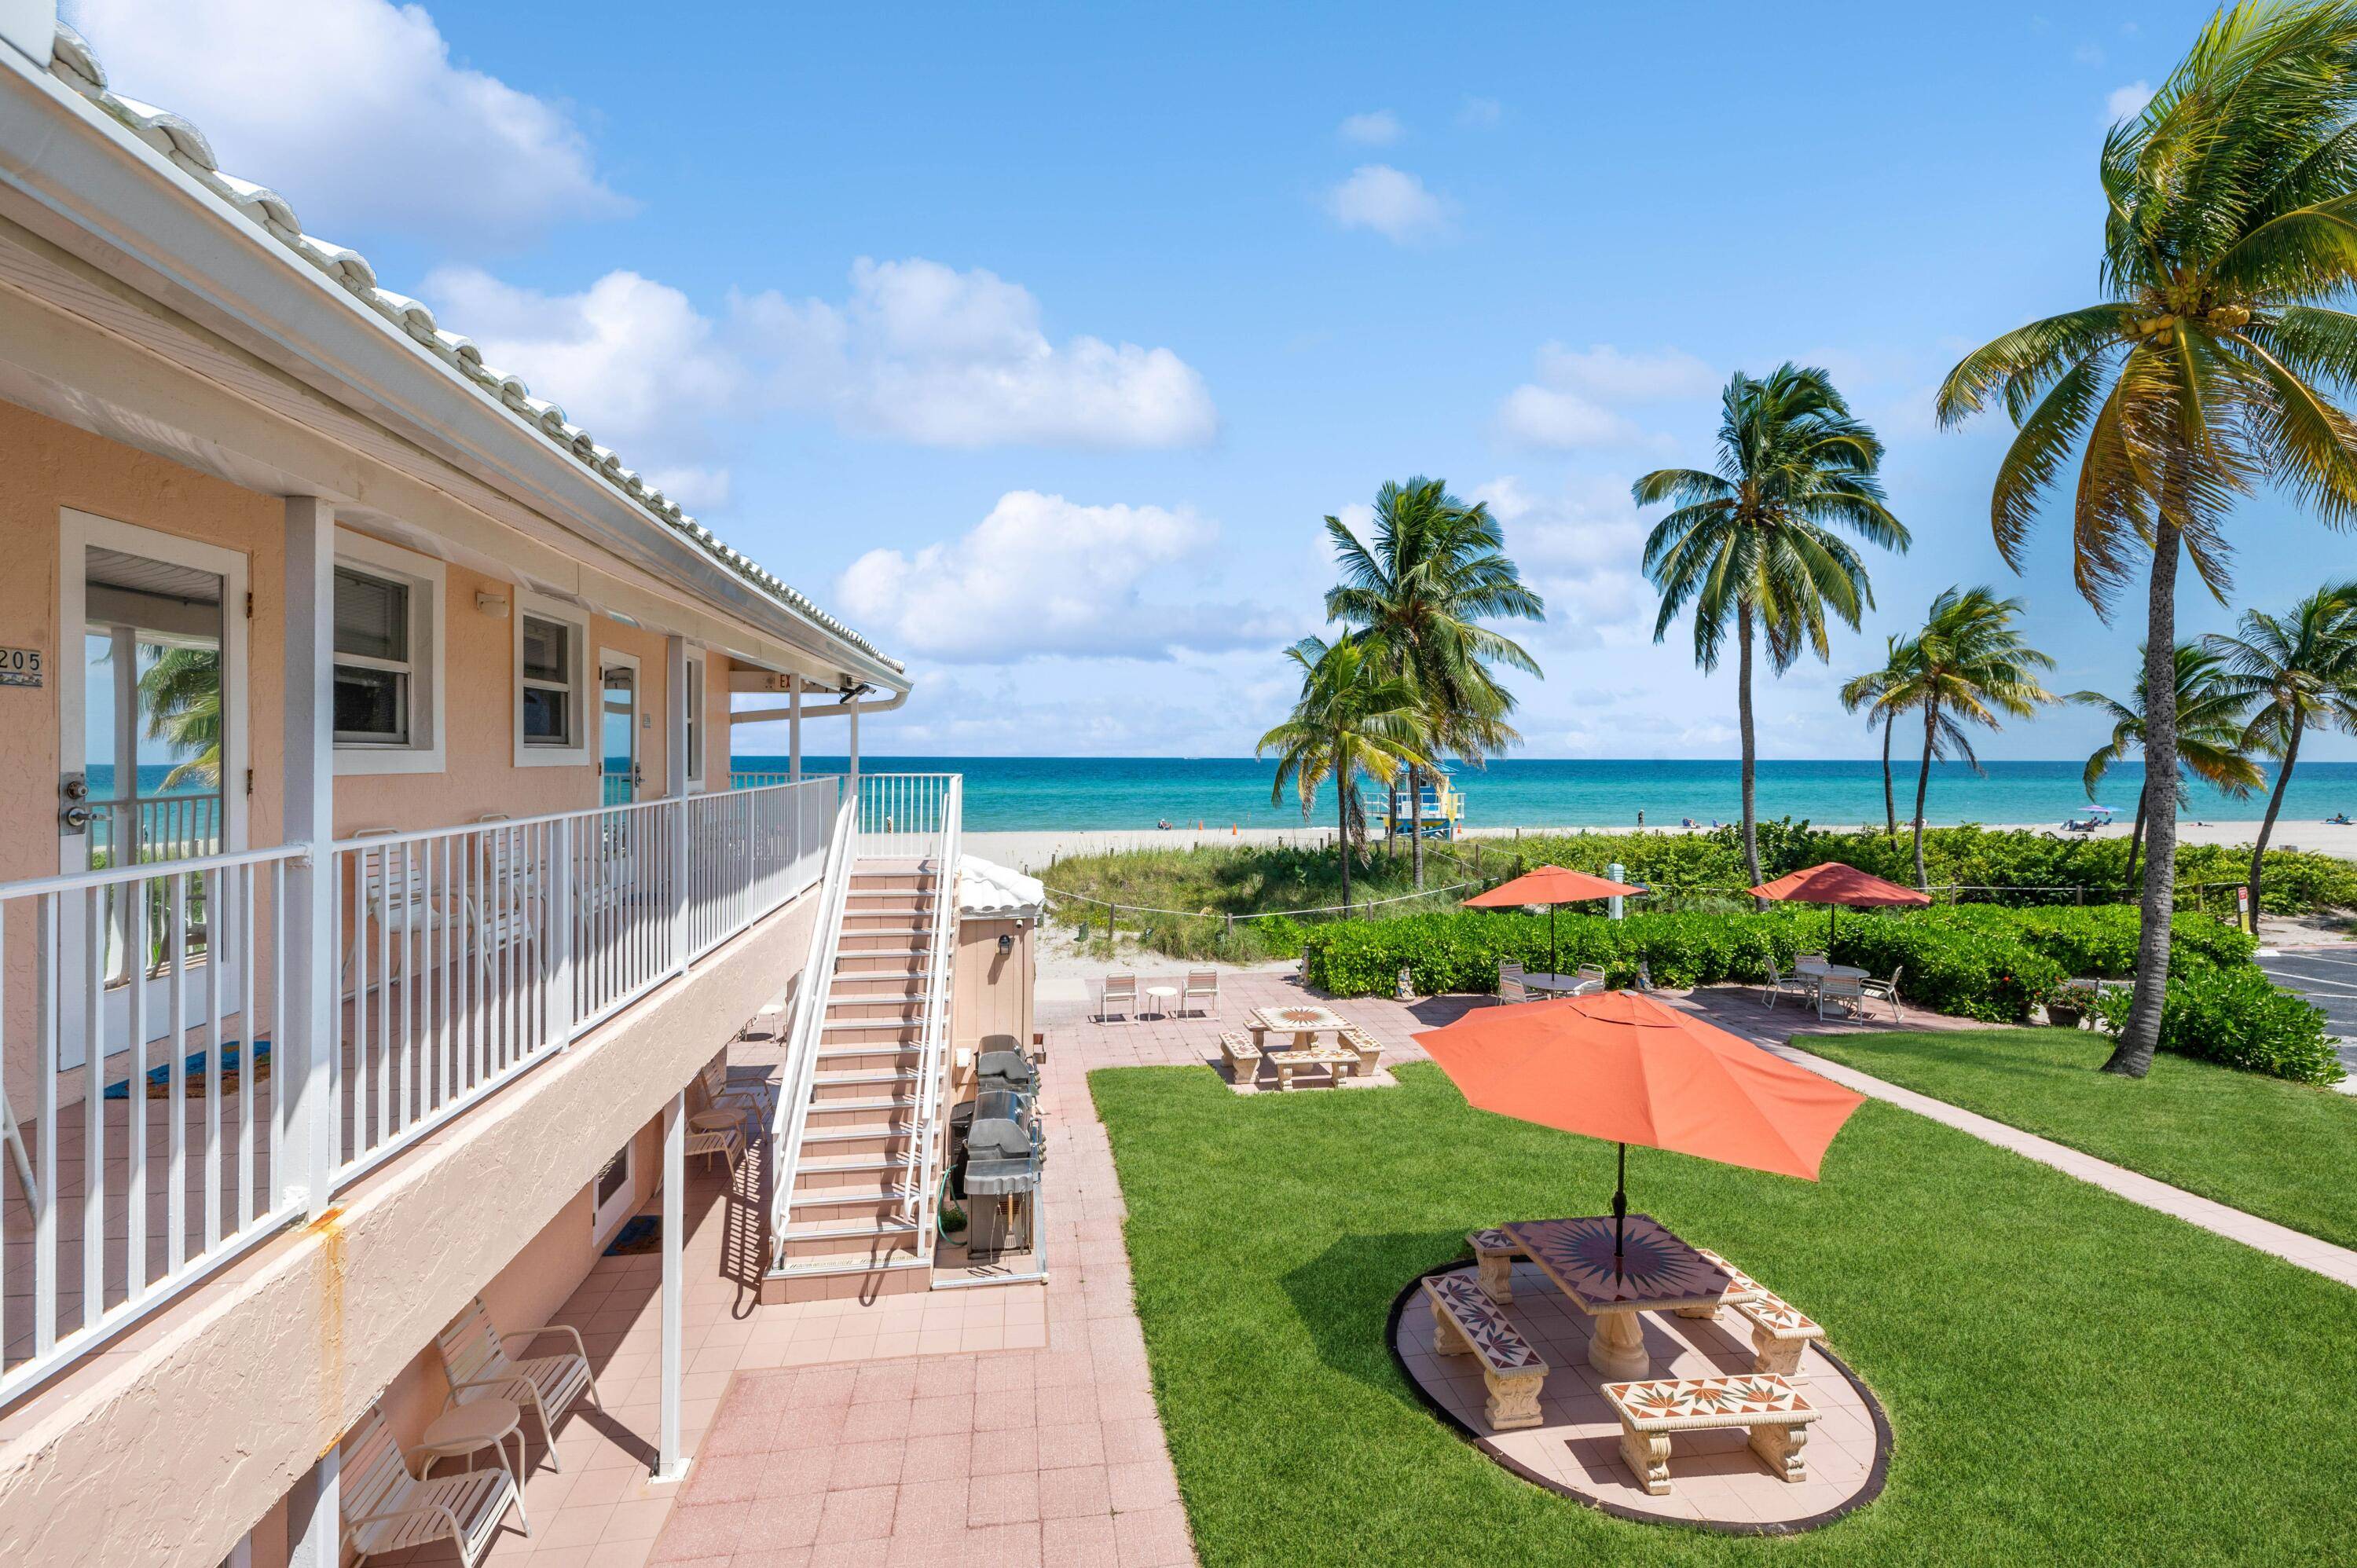 Nestled on the picturesque coastline of Hollywood, Florida, the Manta Ray Hotel presents an unparalleled investment opportunity for discerning buyers.